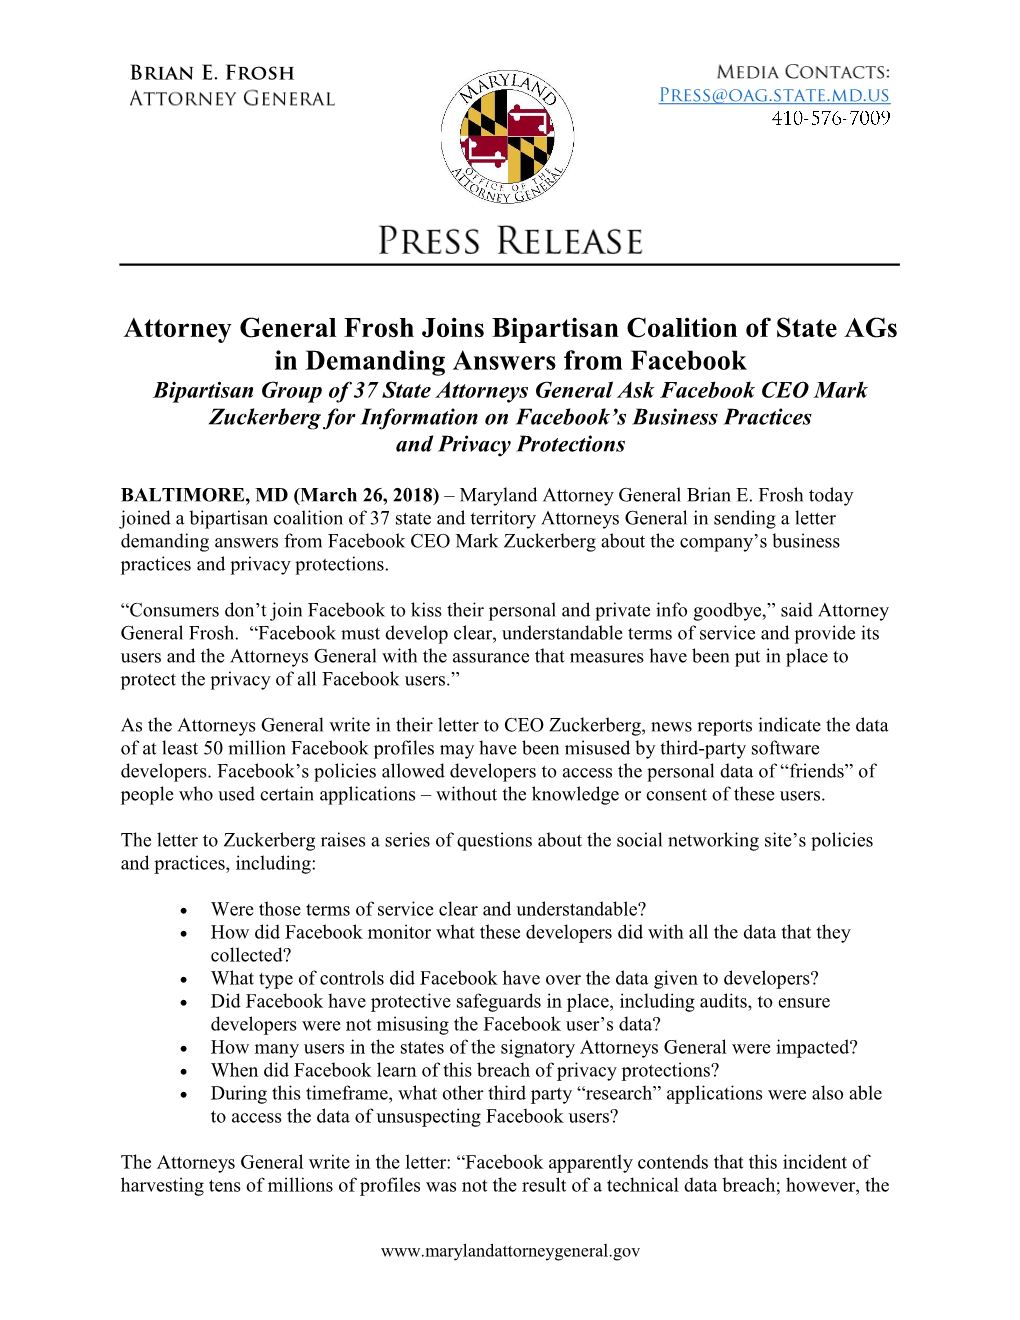 Attorney General Frosh Joins Bipartisan Coalition of State Ags In